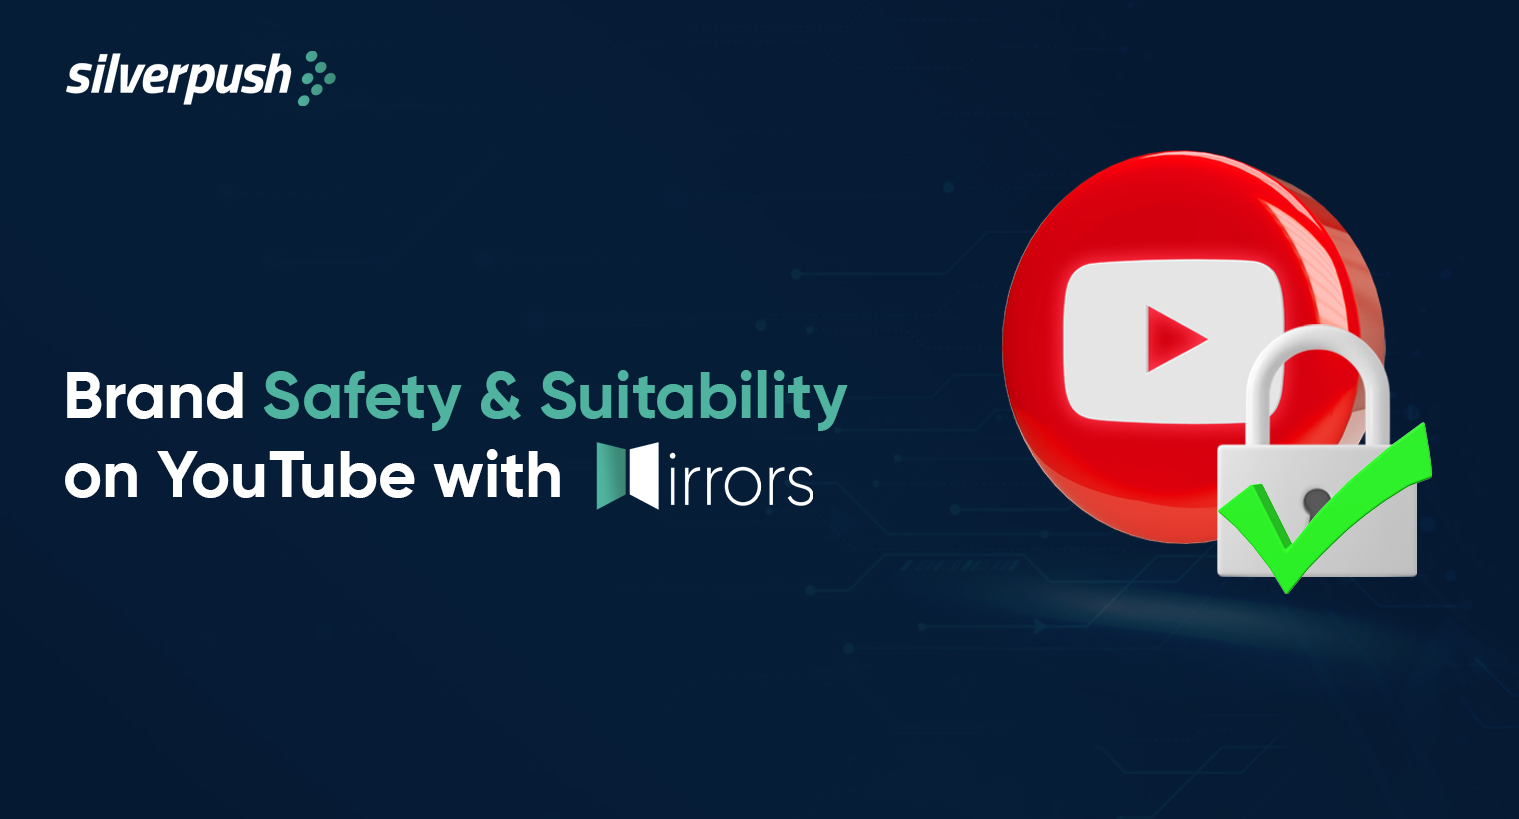 How-Does-Silverpush-Ensure-Brand-Safety-and-Suitability-on-YouTube-Silverpush